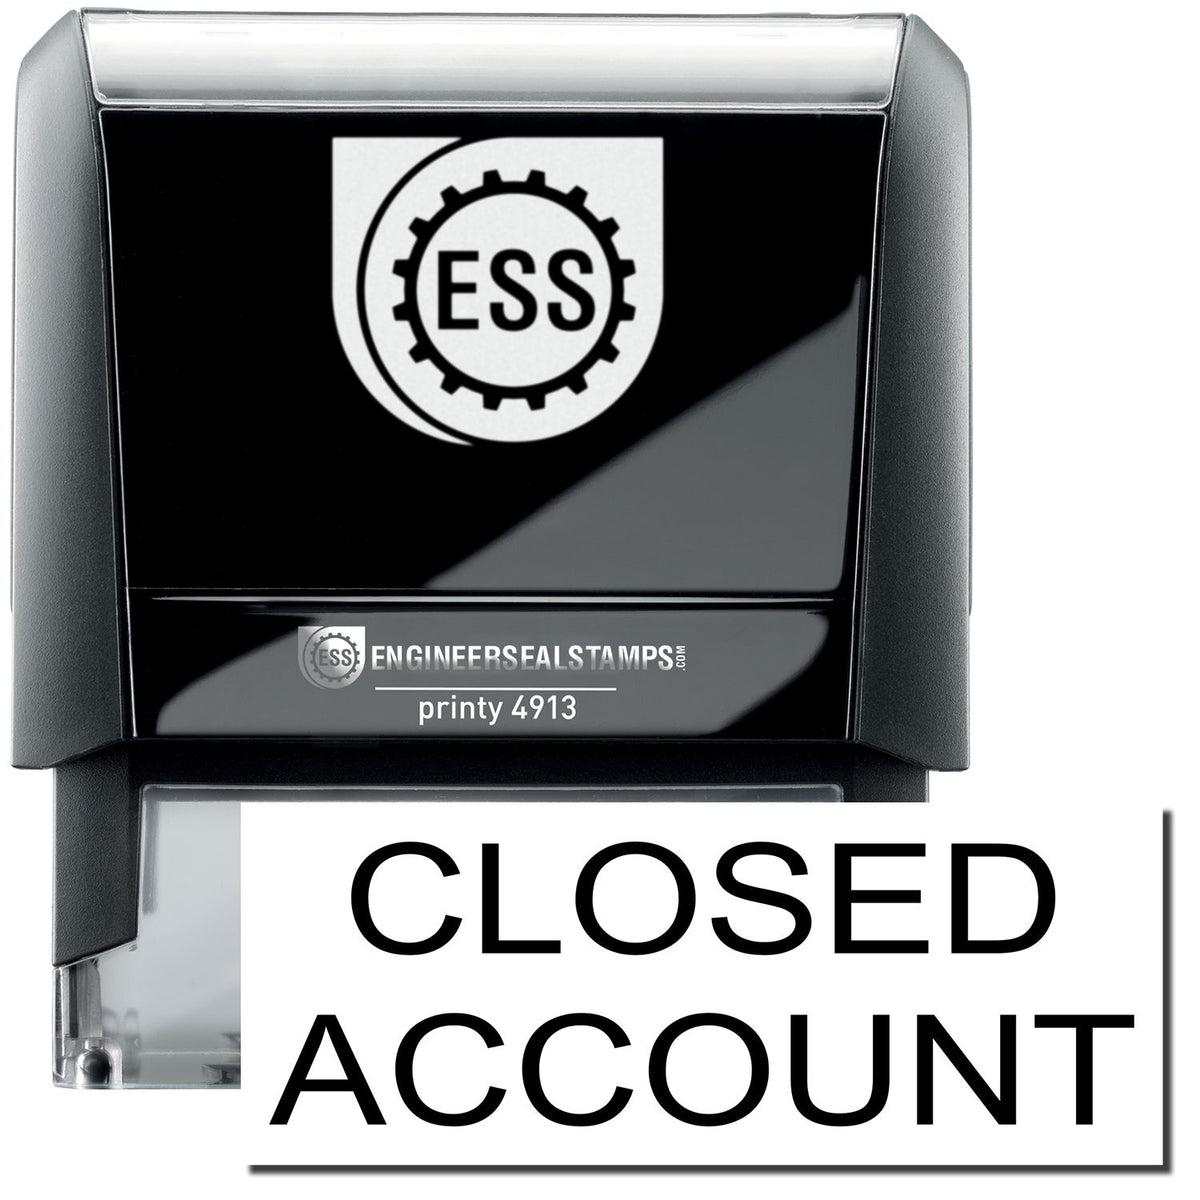 A self-inking stamp with a stamped image showing how the text &quot;CLOSED ACCOUNT&quot; in a large bold font is displayed by it.